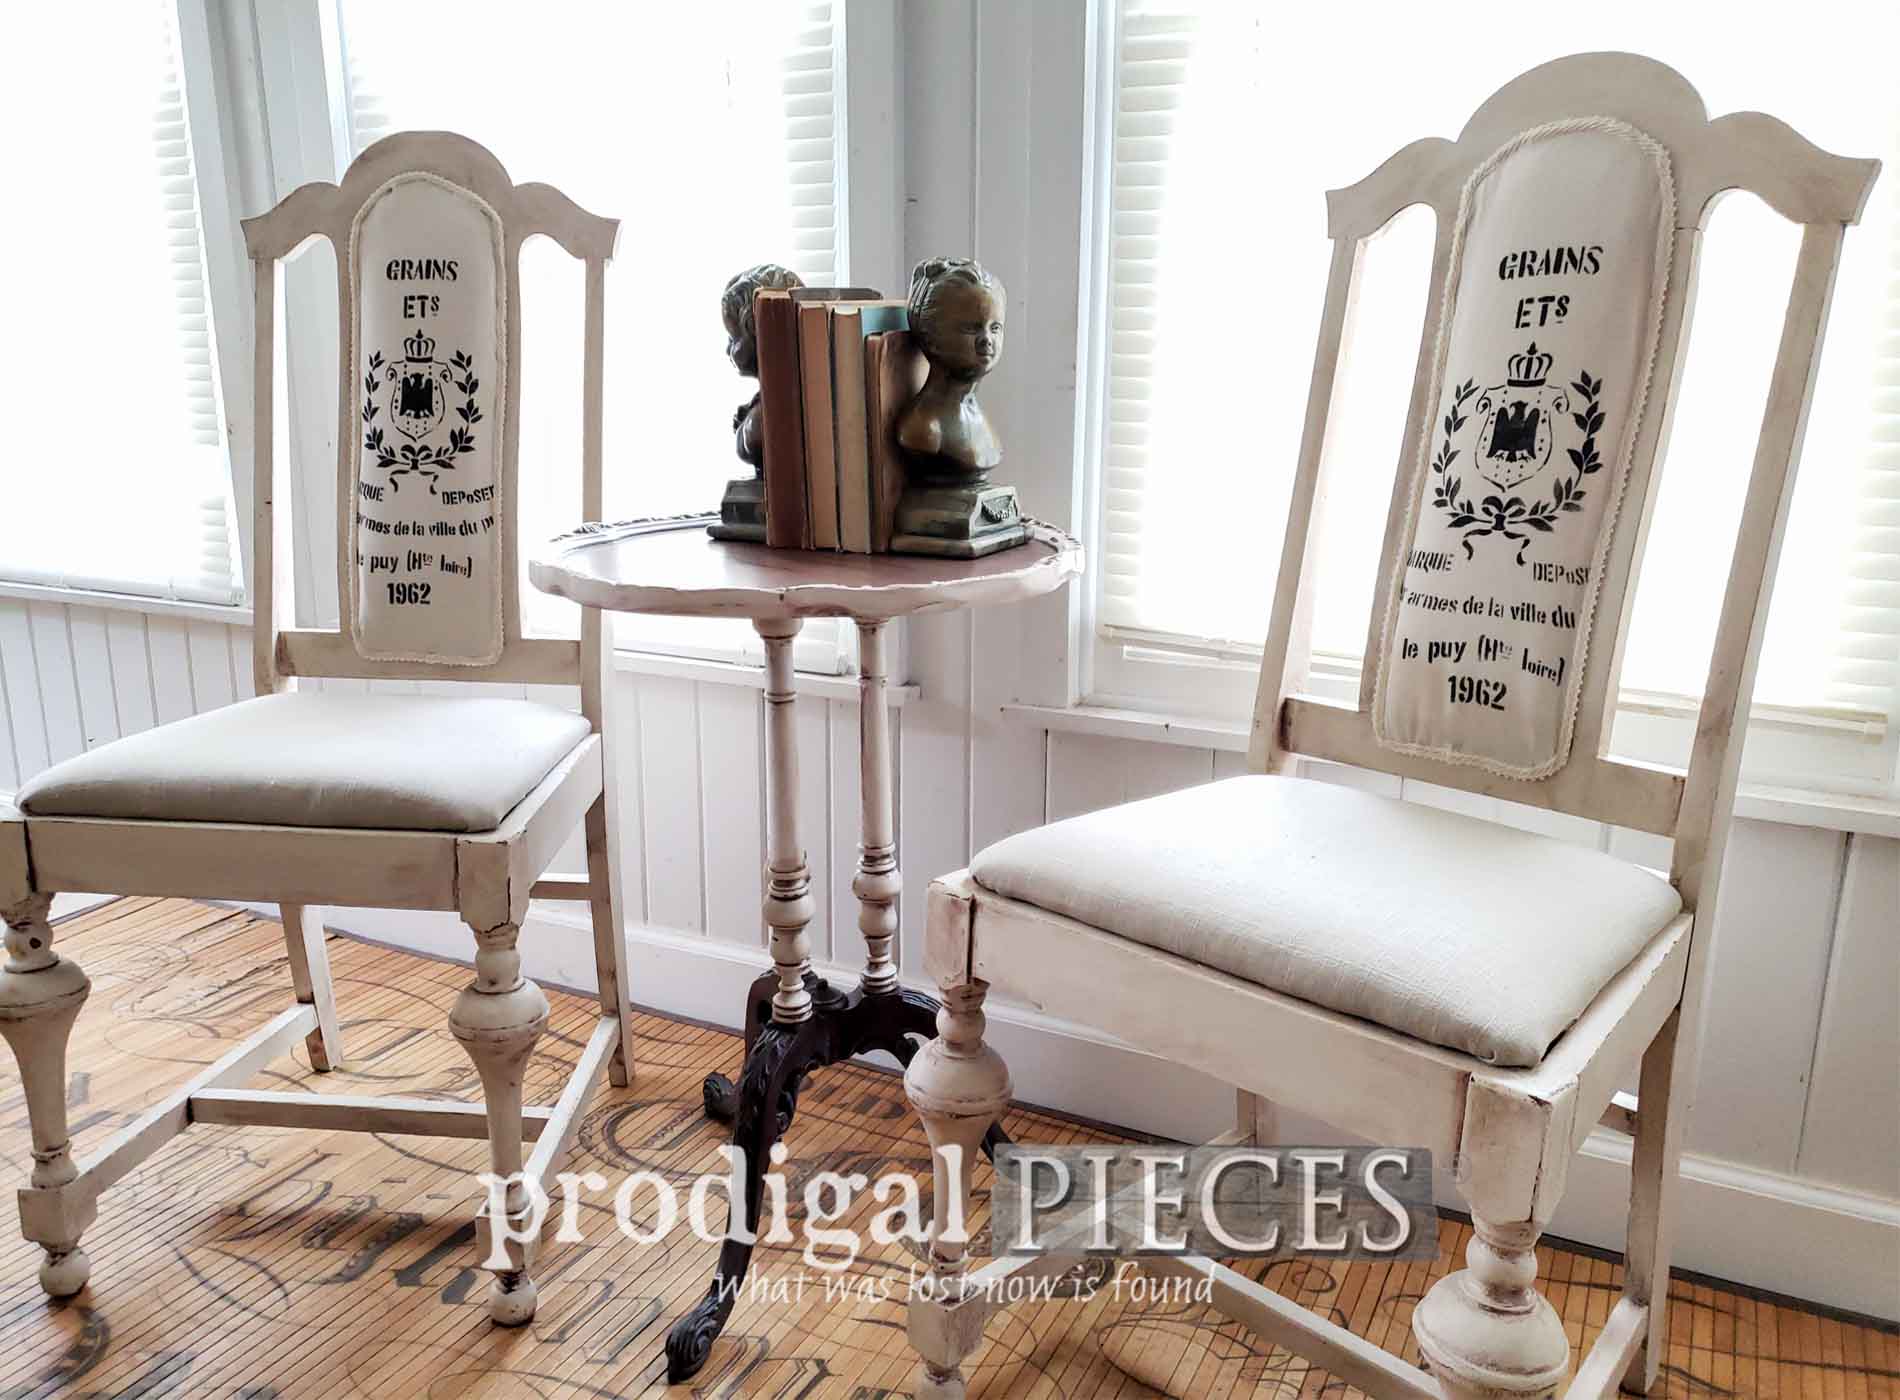 Featured DIY Grain Sack Antique Chairs Restored from the Curb by Larissa of Prodigal Pieces | prodigalpieces.com #prodigalpieces #diy #home #furniture #farmhouse #homedecor #homedecorideas